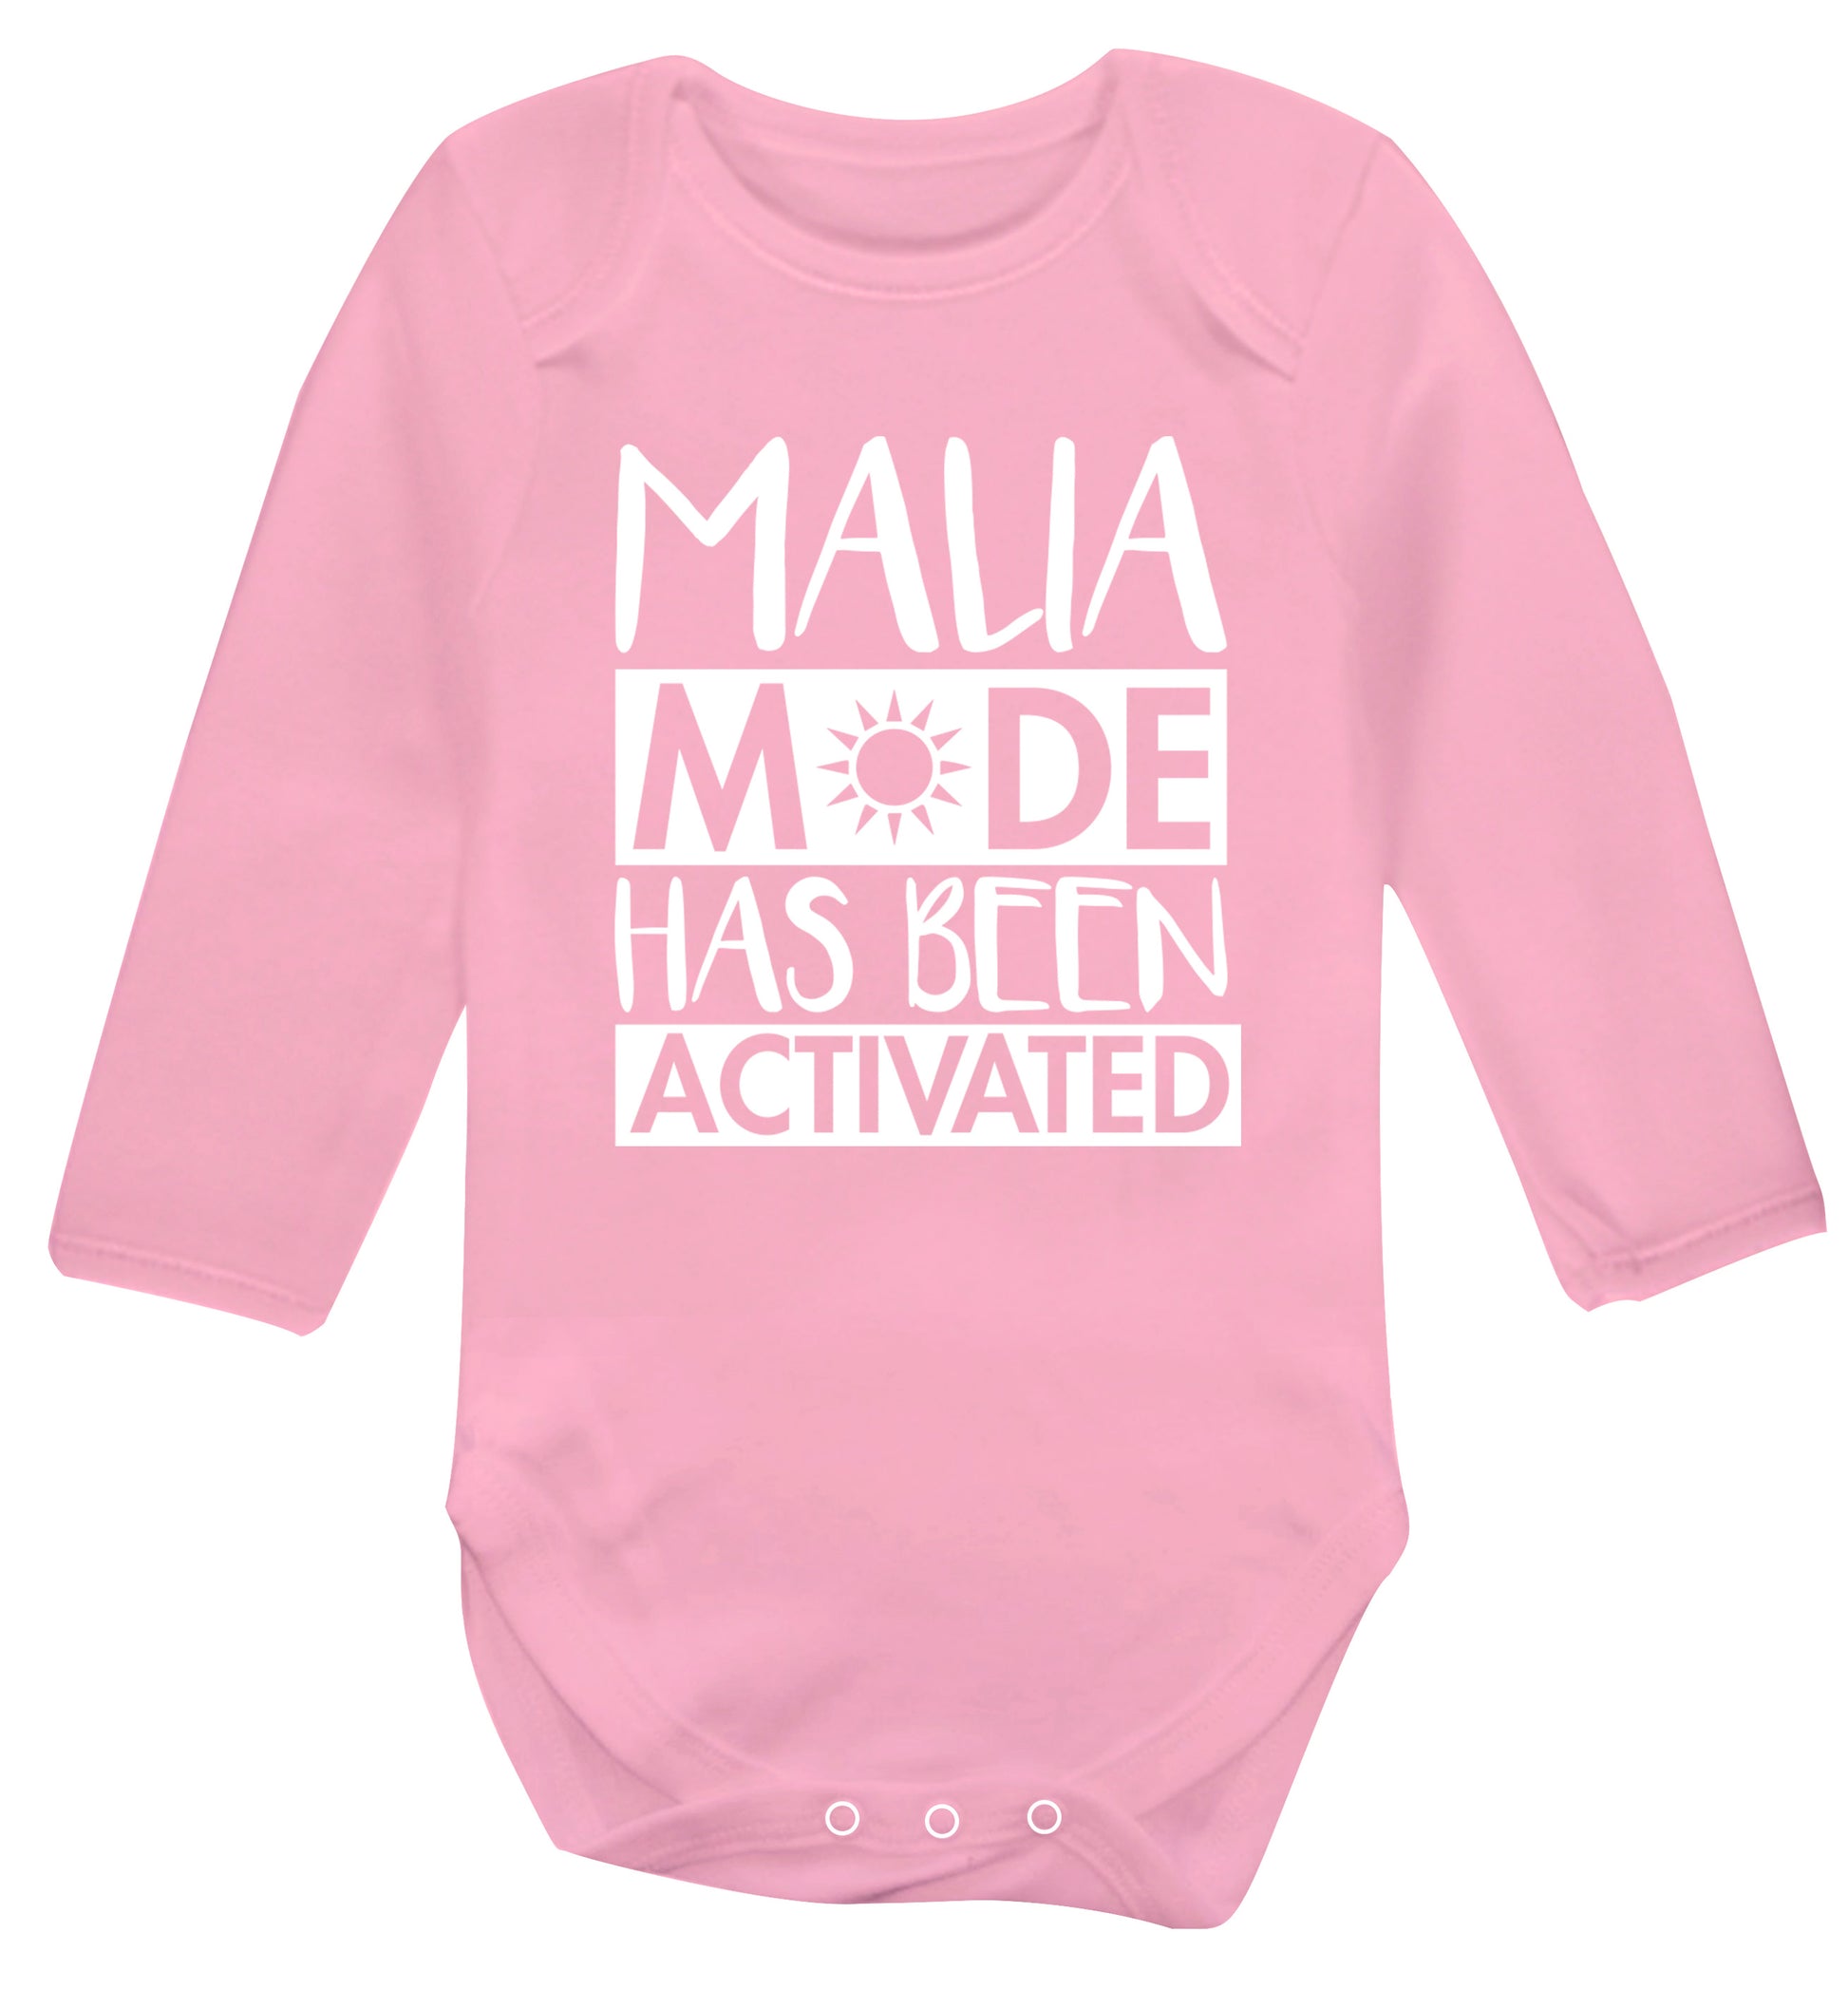 Malia mode has been activated Baby Vest long sleeved pale pink 6-12 months